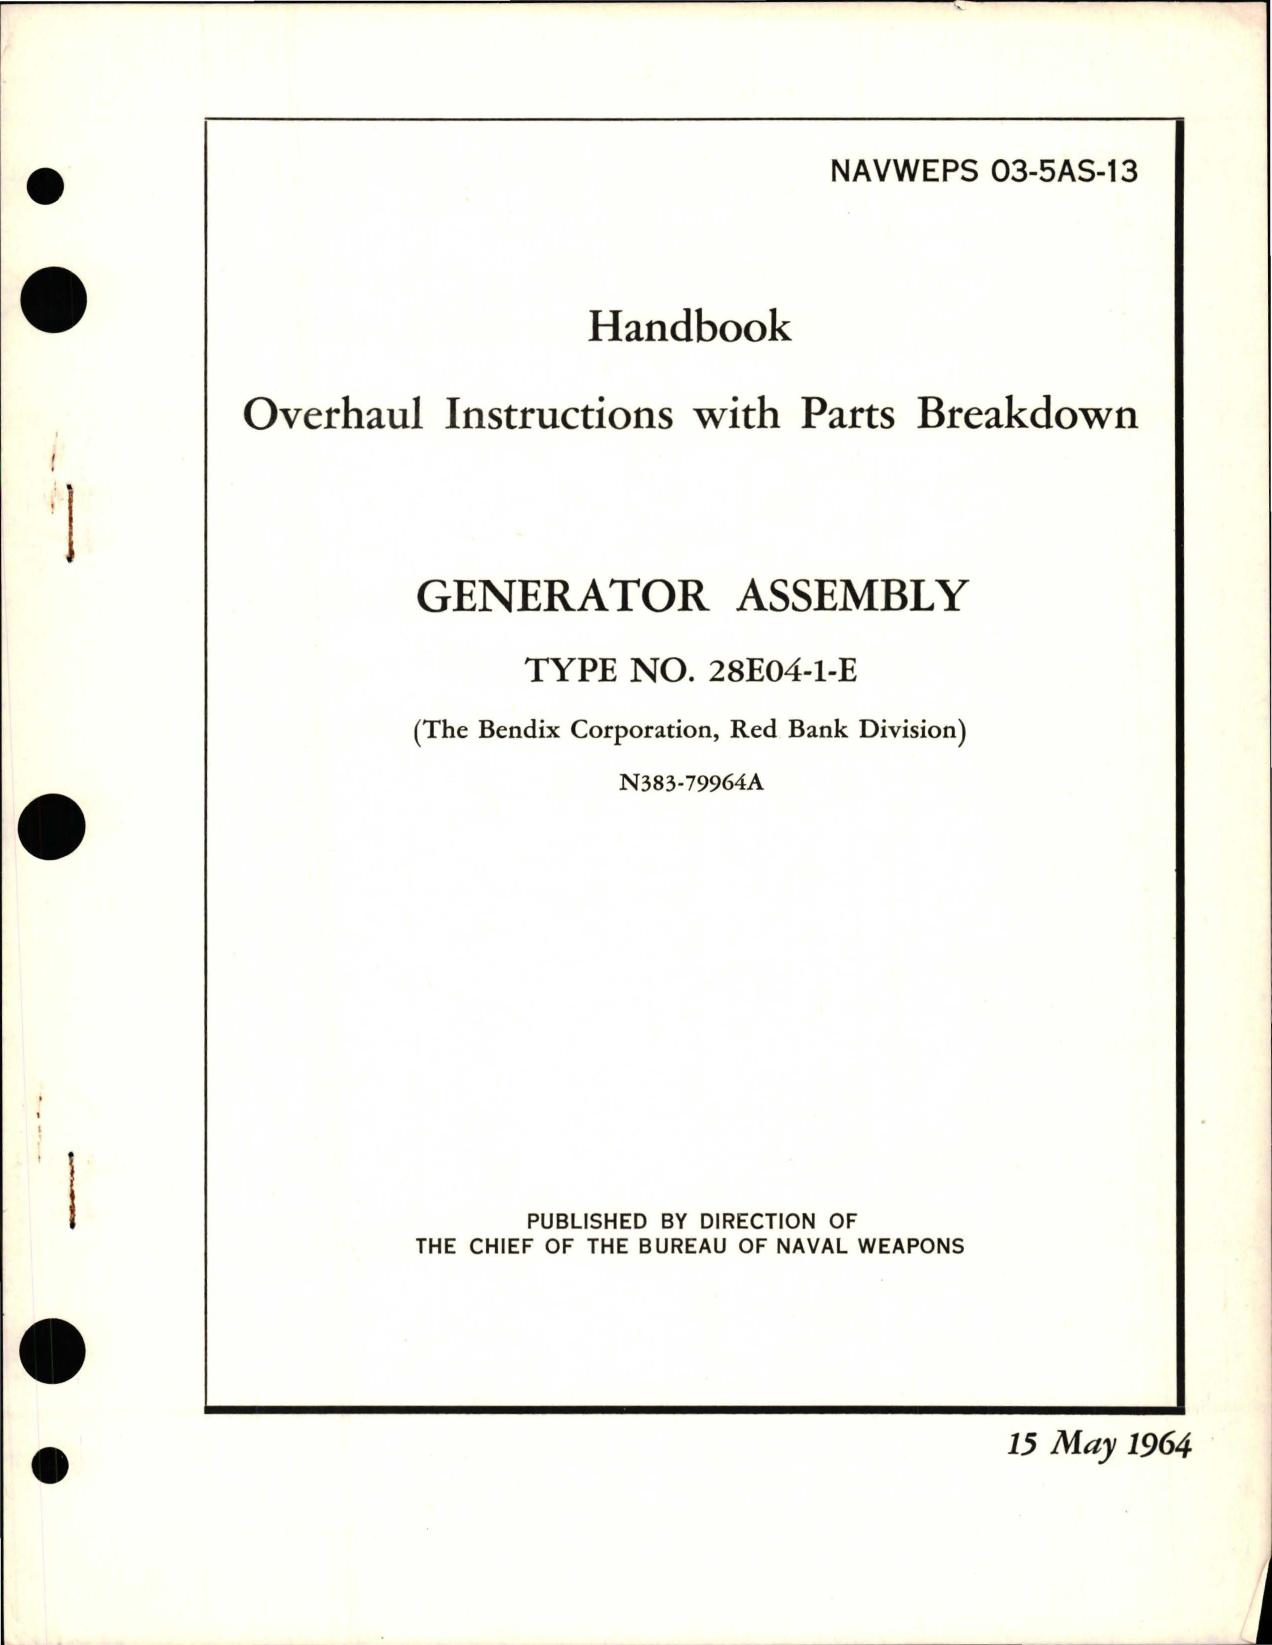 Sample page 1 from AirCorps Library document: Overhaul Instructions with Parts Breakdown for Generator Assembly - Type 28E04-1-E 